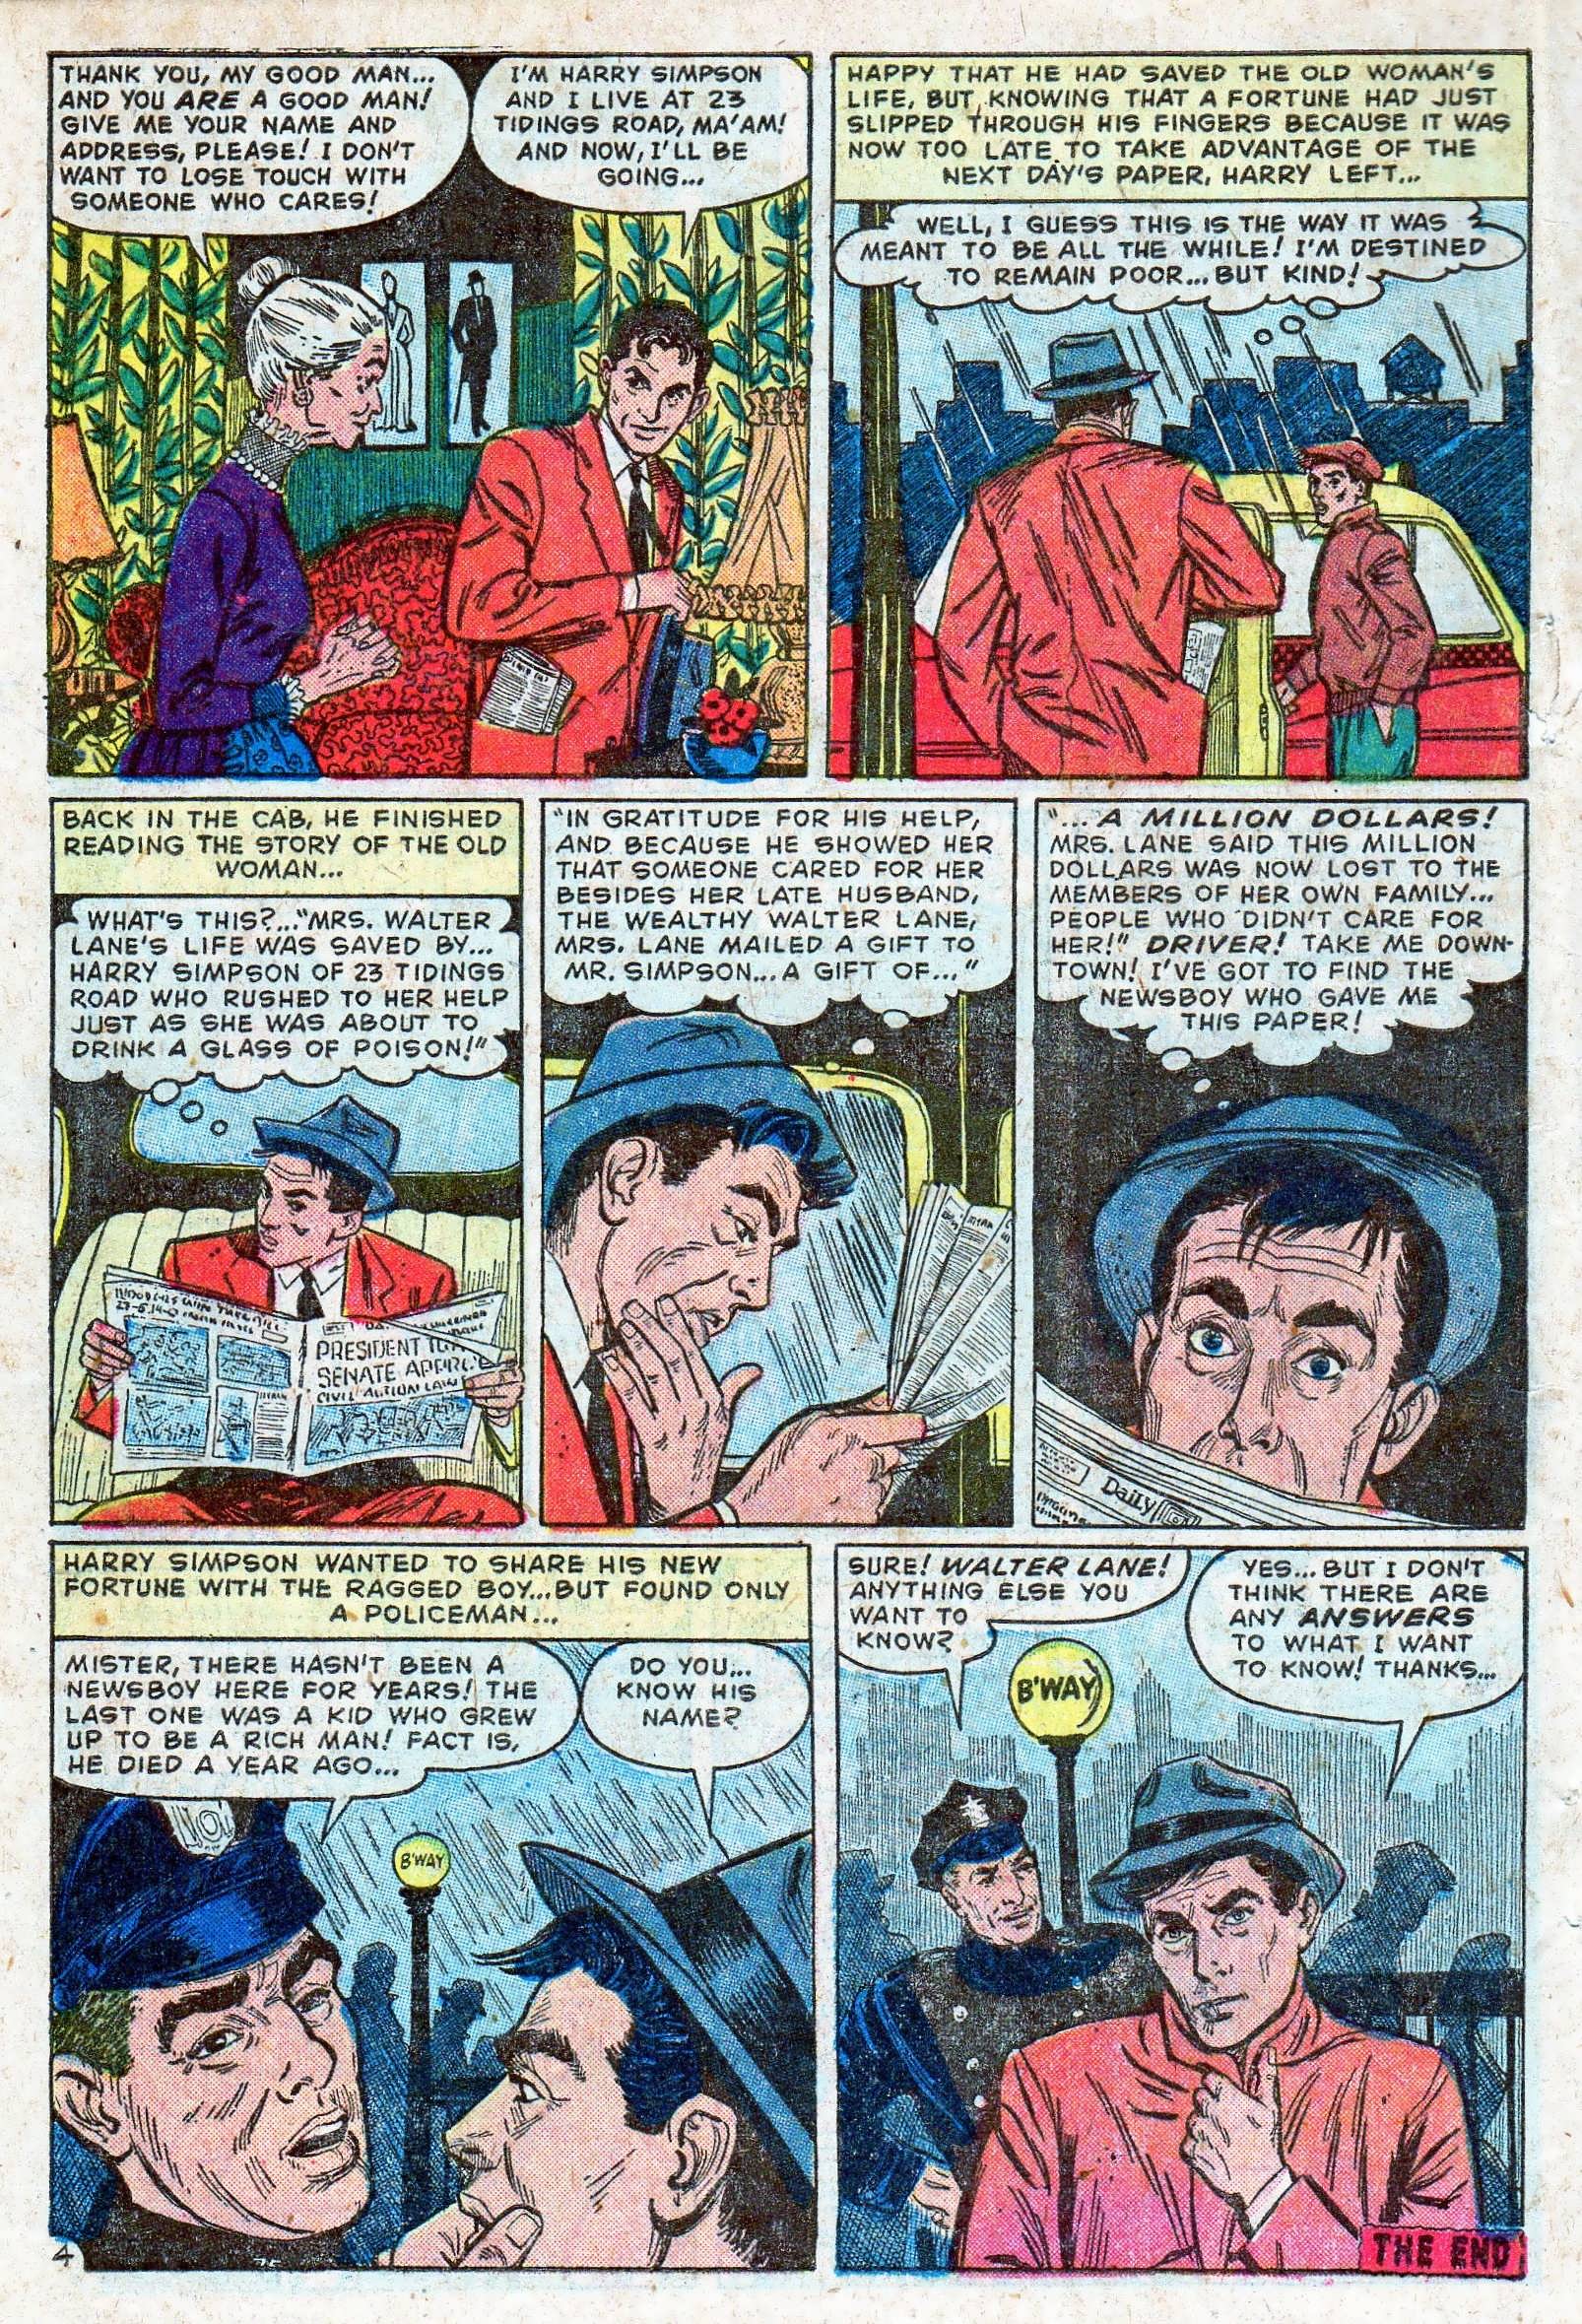 Marvel Tales (1949) 155 Page 31